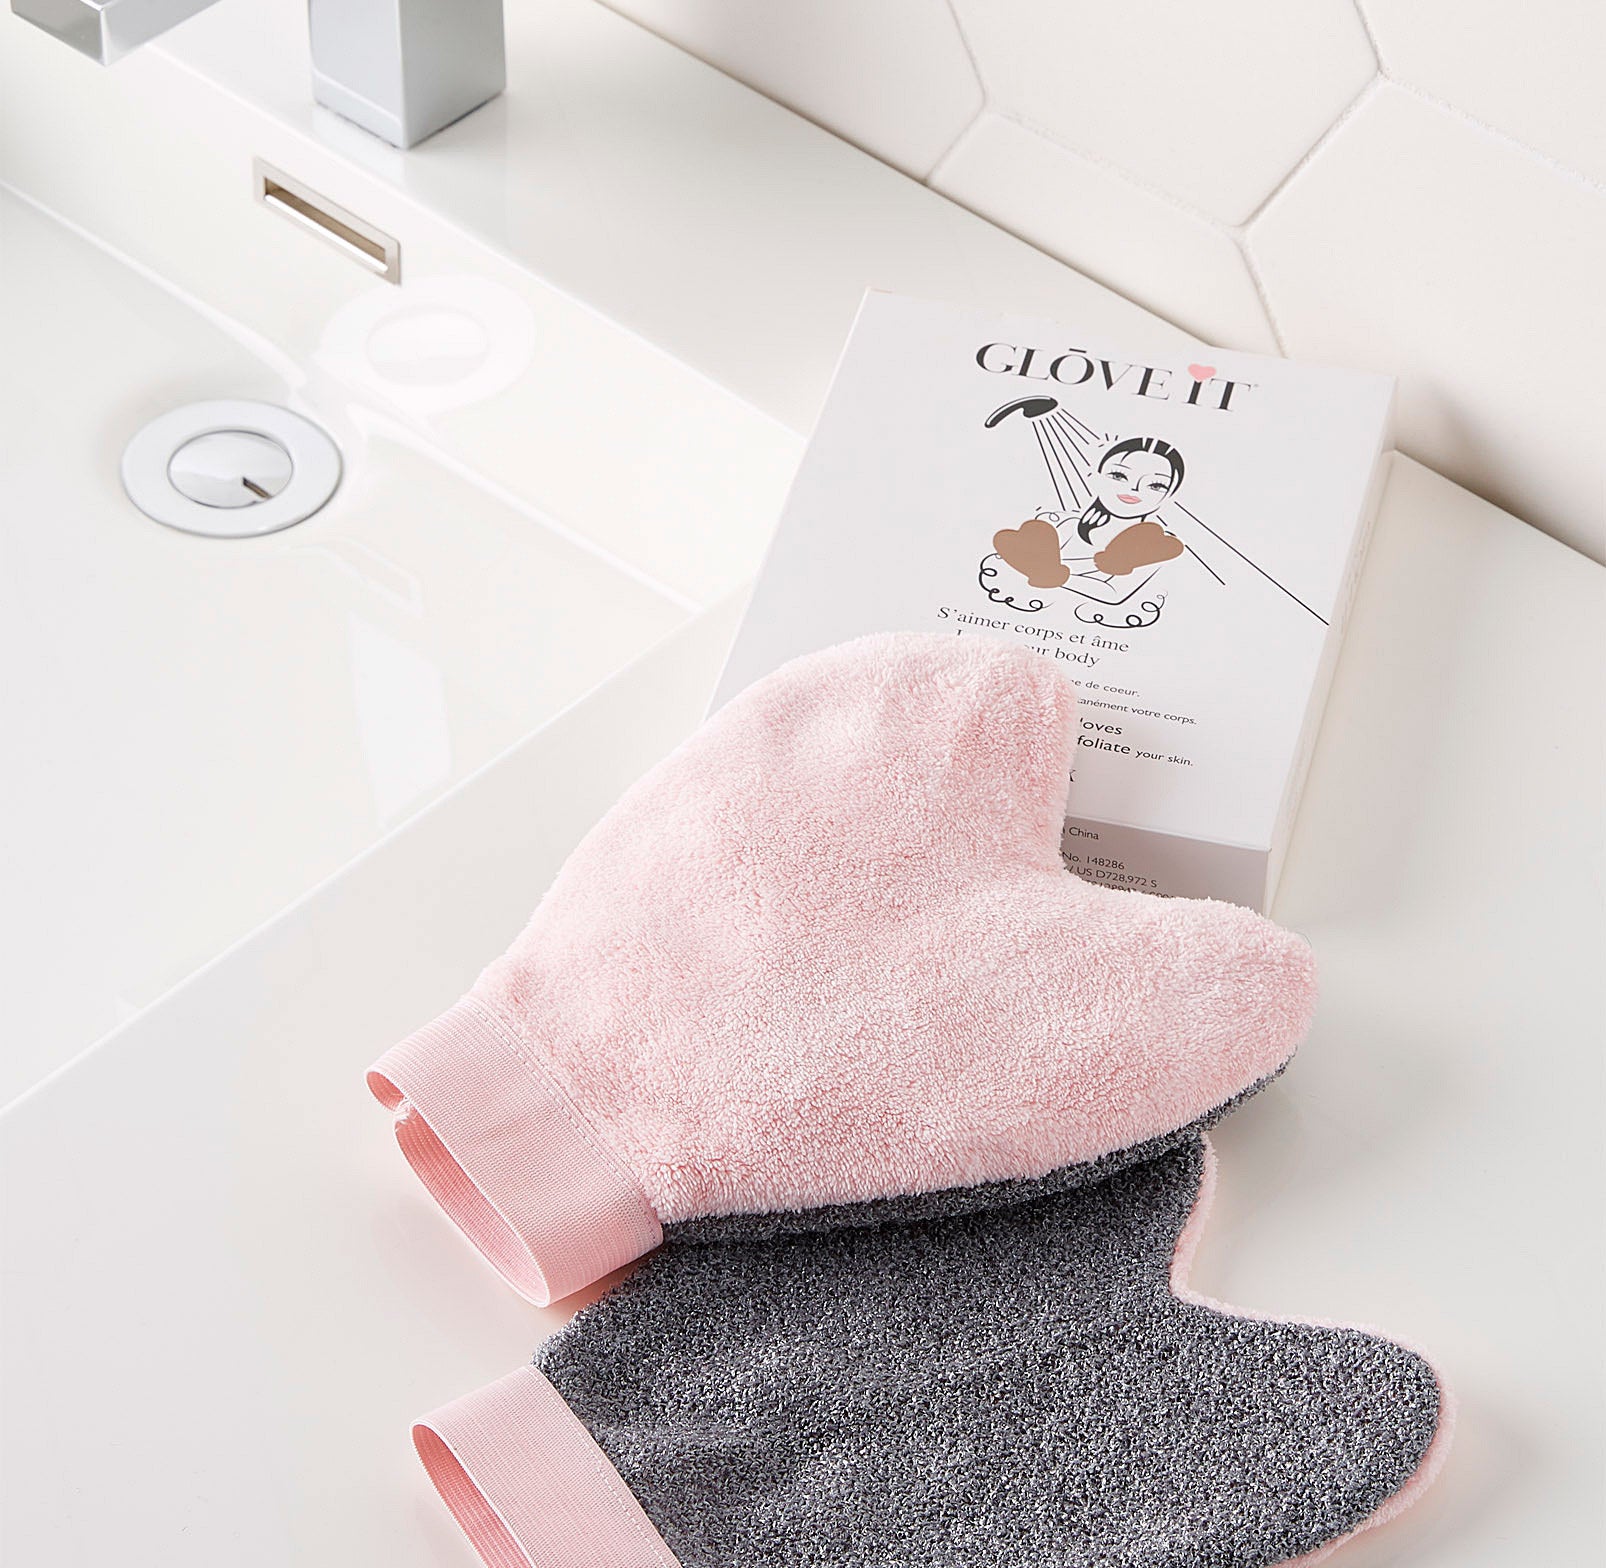 A pair of soft cloth wash gloves on a bathroom counter